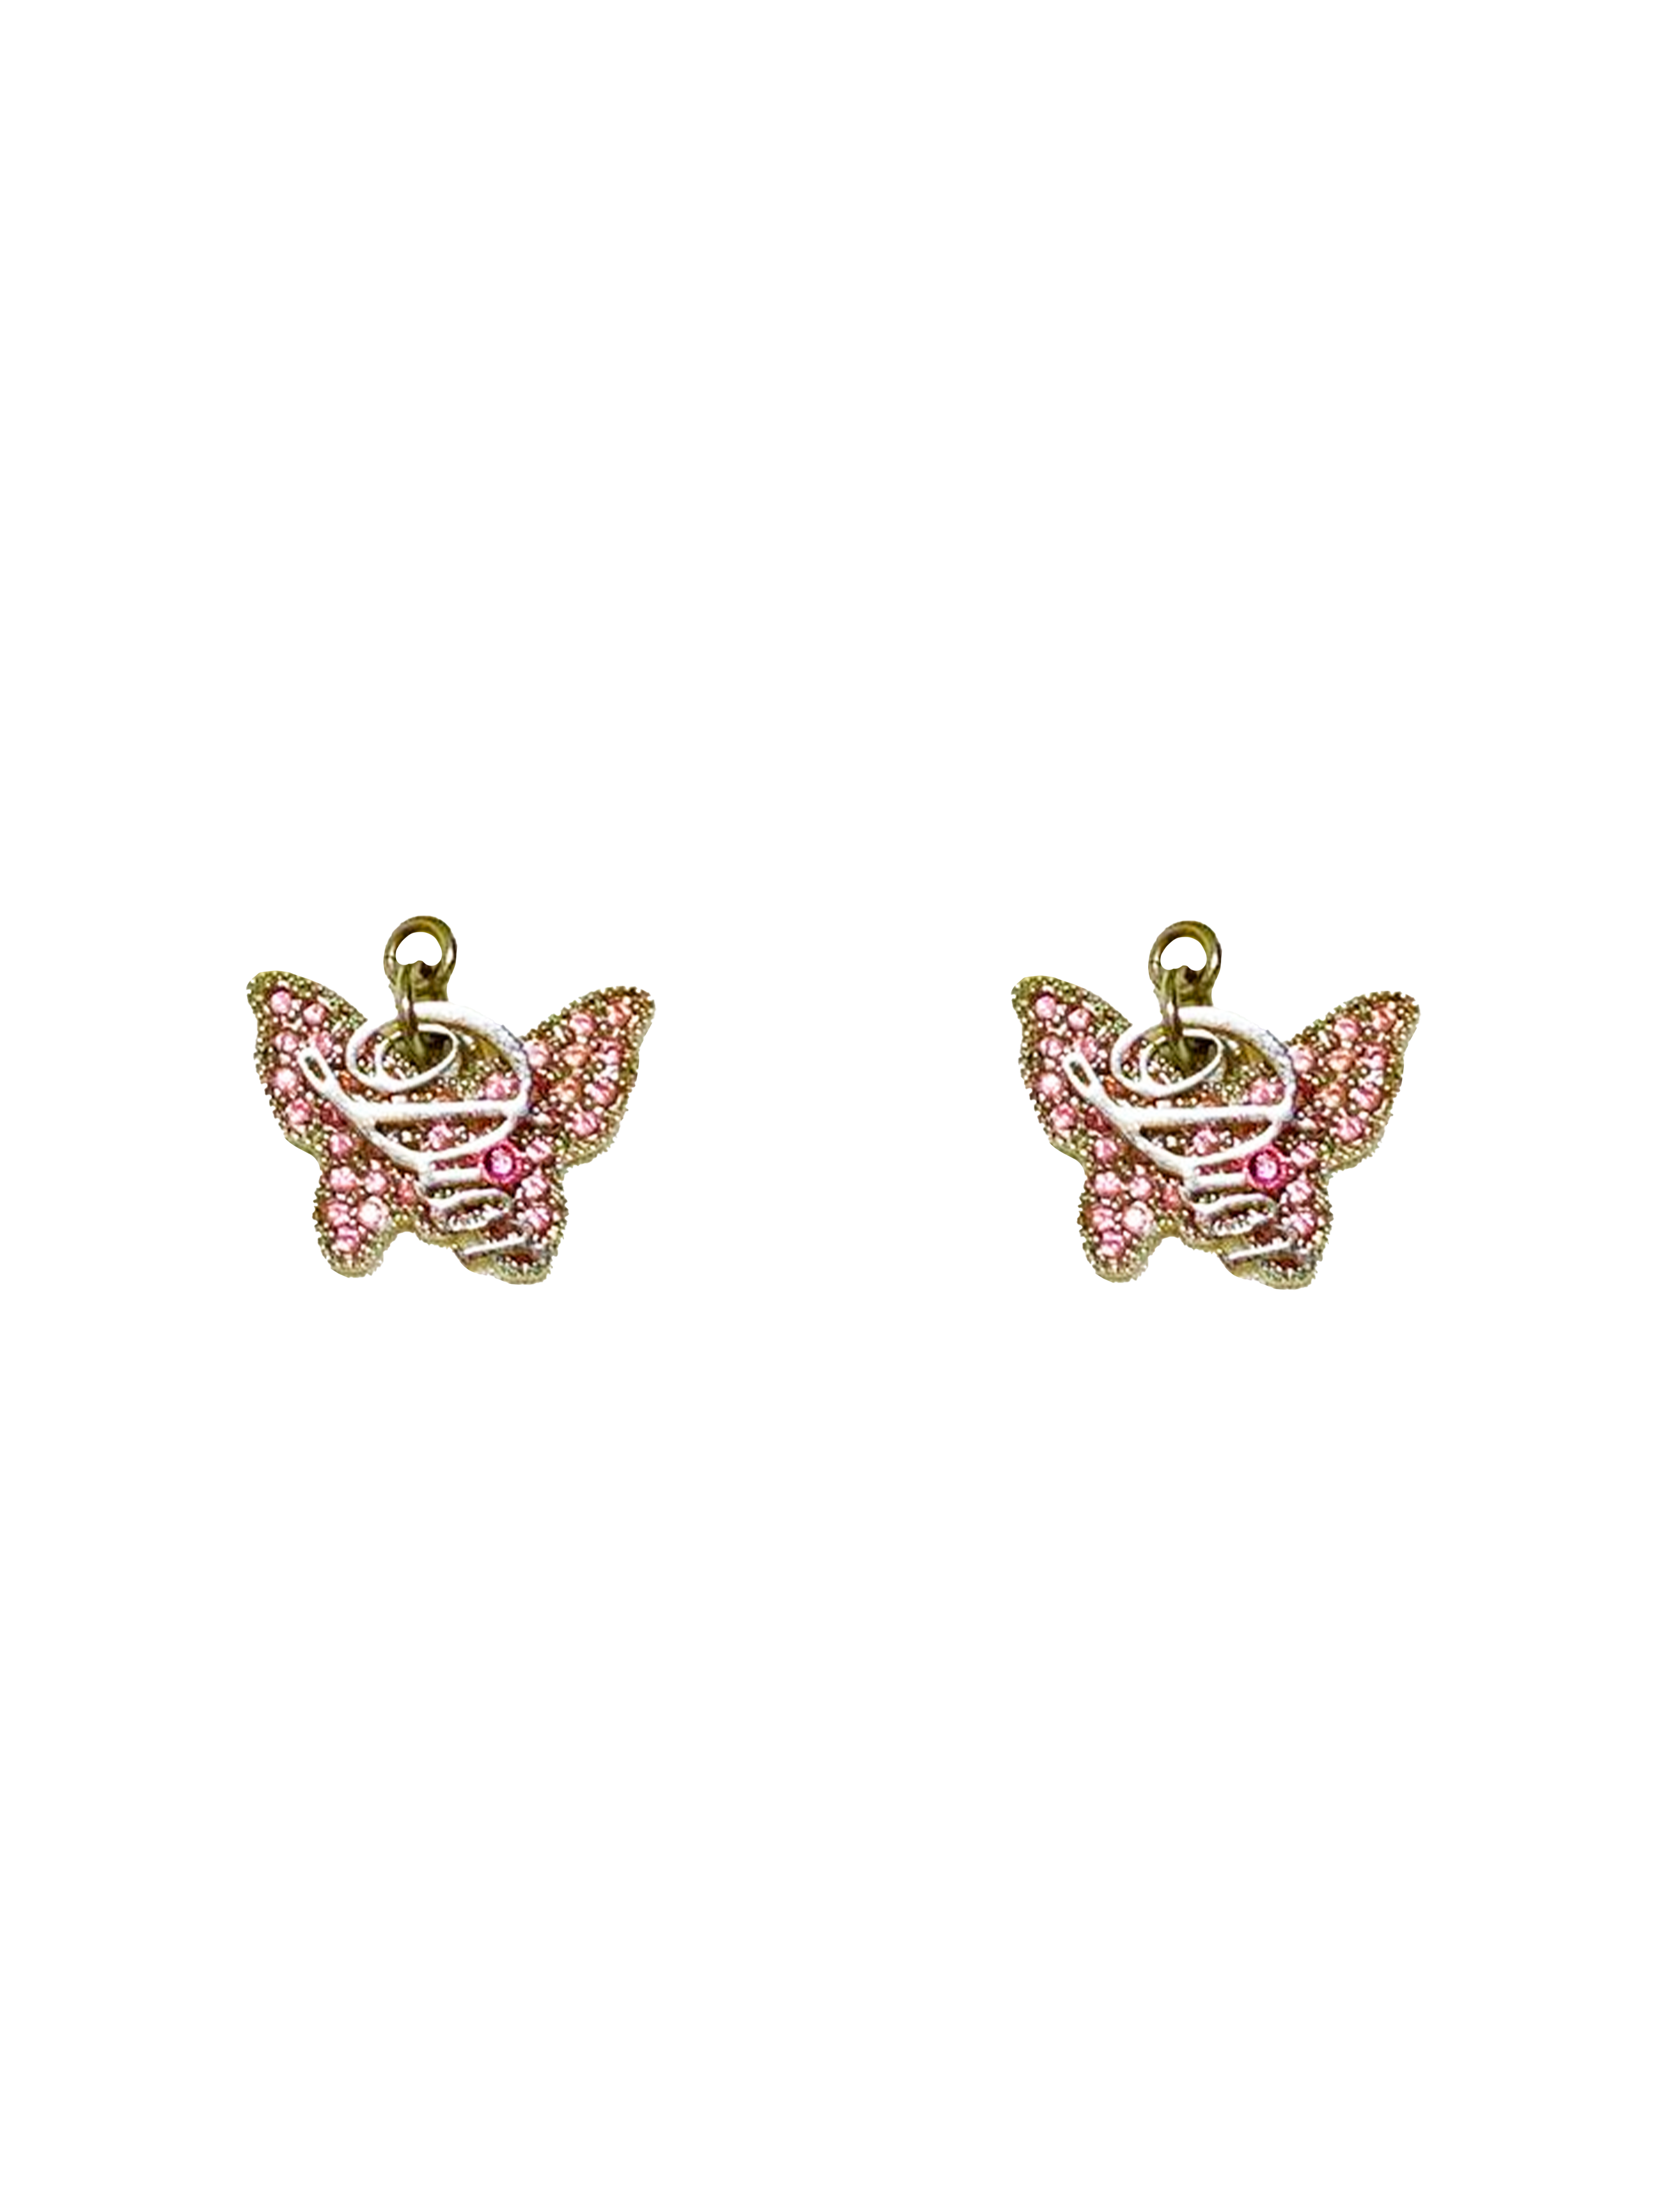 Christian Dior 2000s Pink Butterfly Earrings